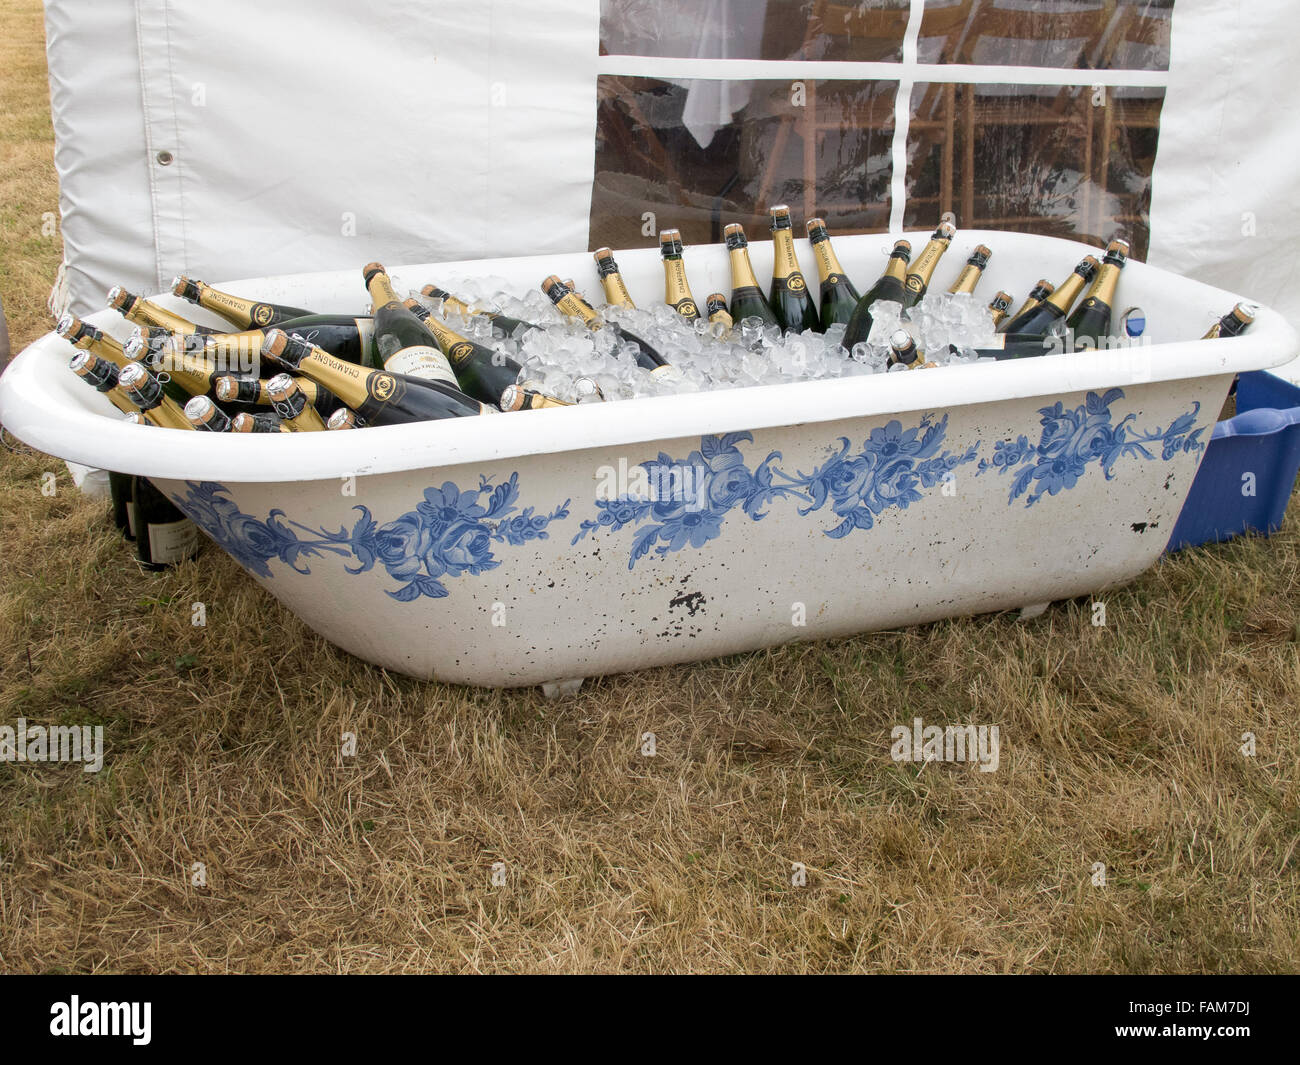 A decorated antique bath filled with champagne and ice for a wedding. Stock Photo